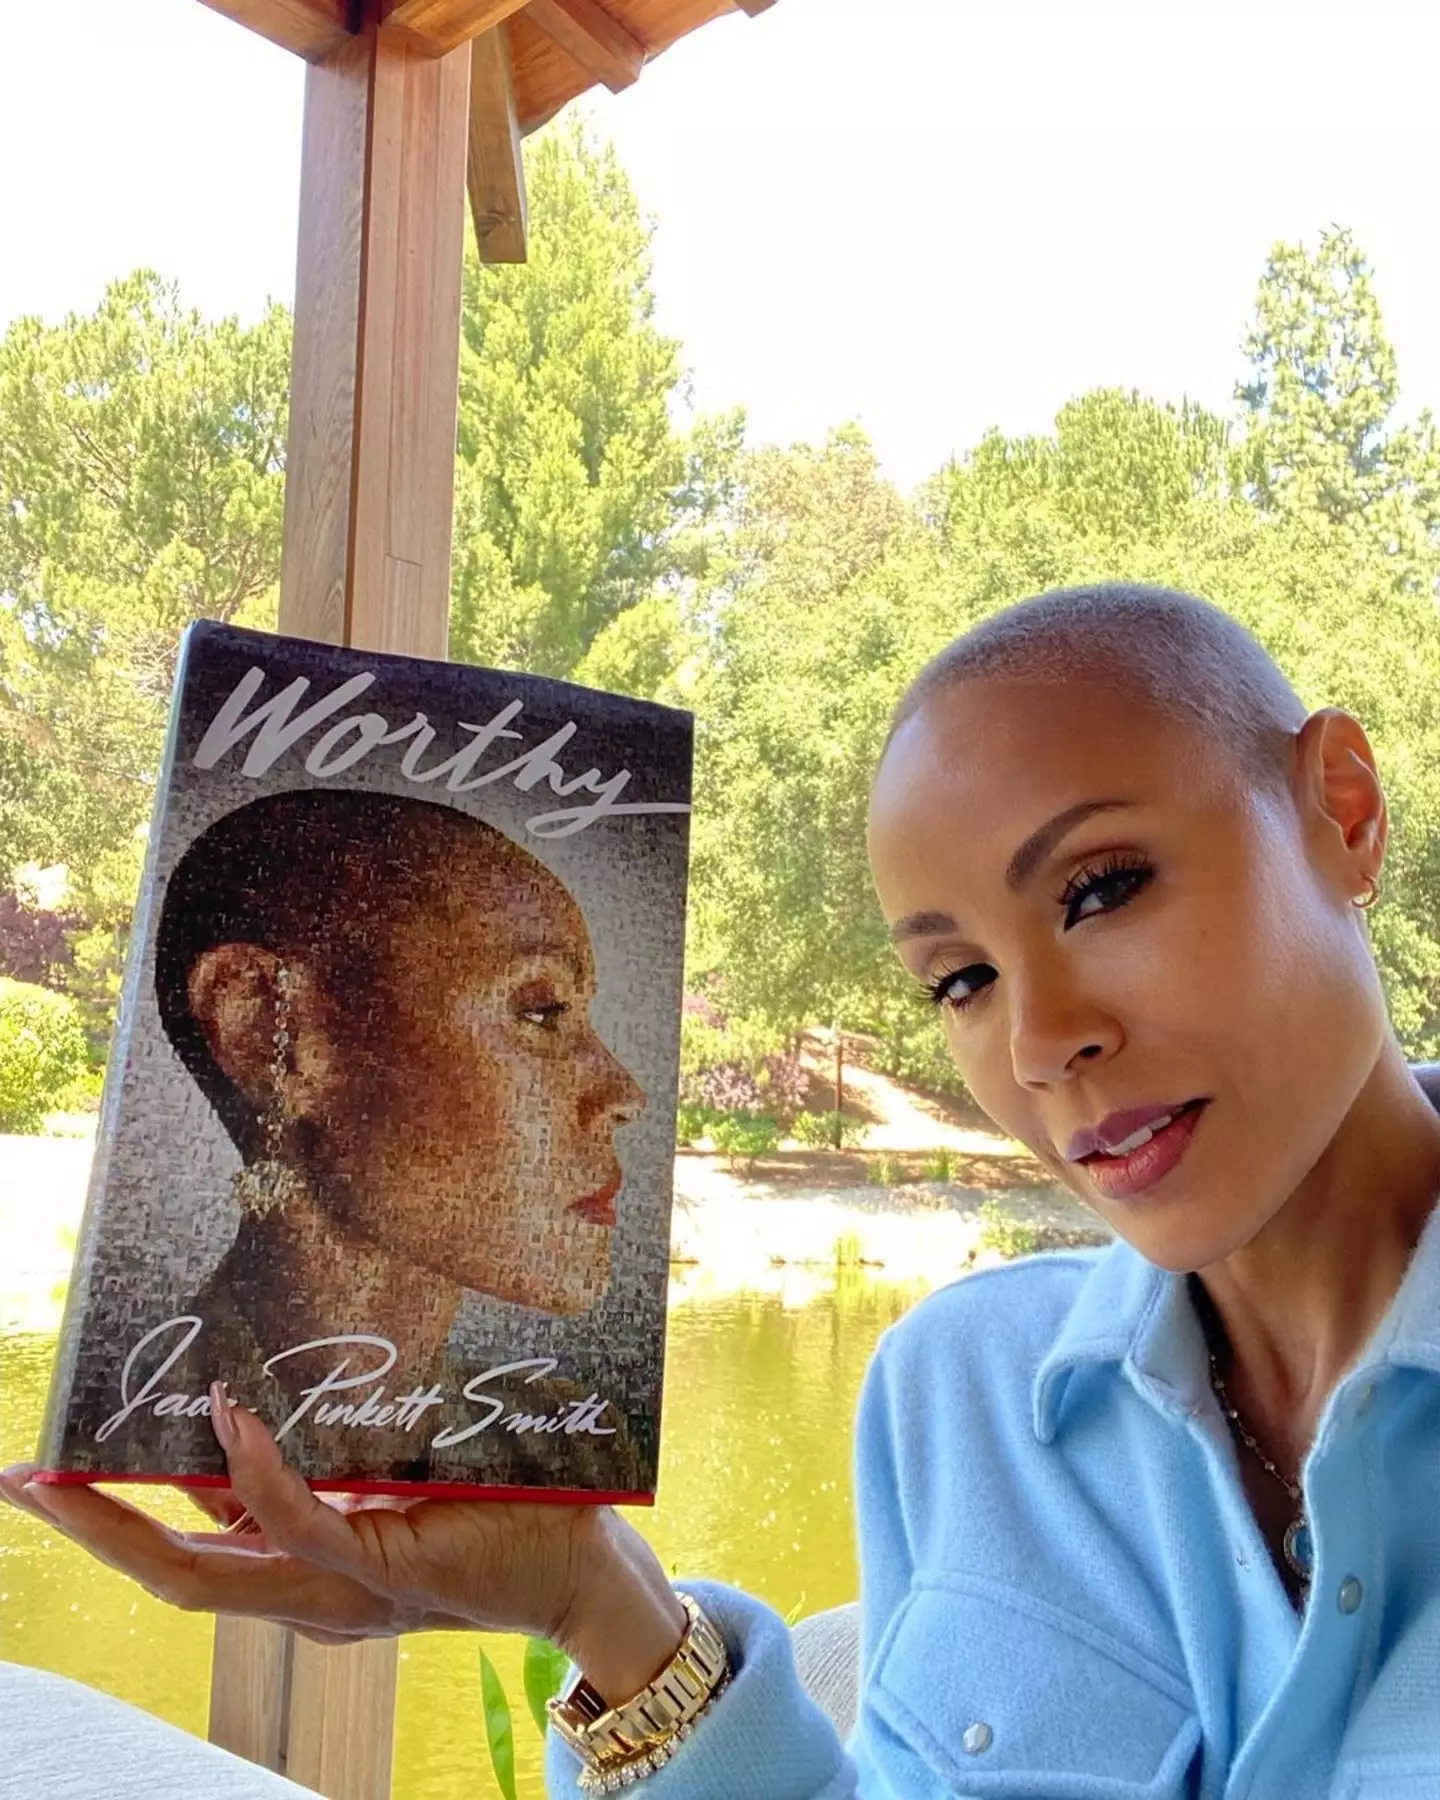 Jada Pinkett Smith spoke out about the separation in an interview ahead of the release of her new book.